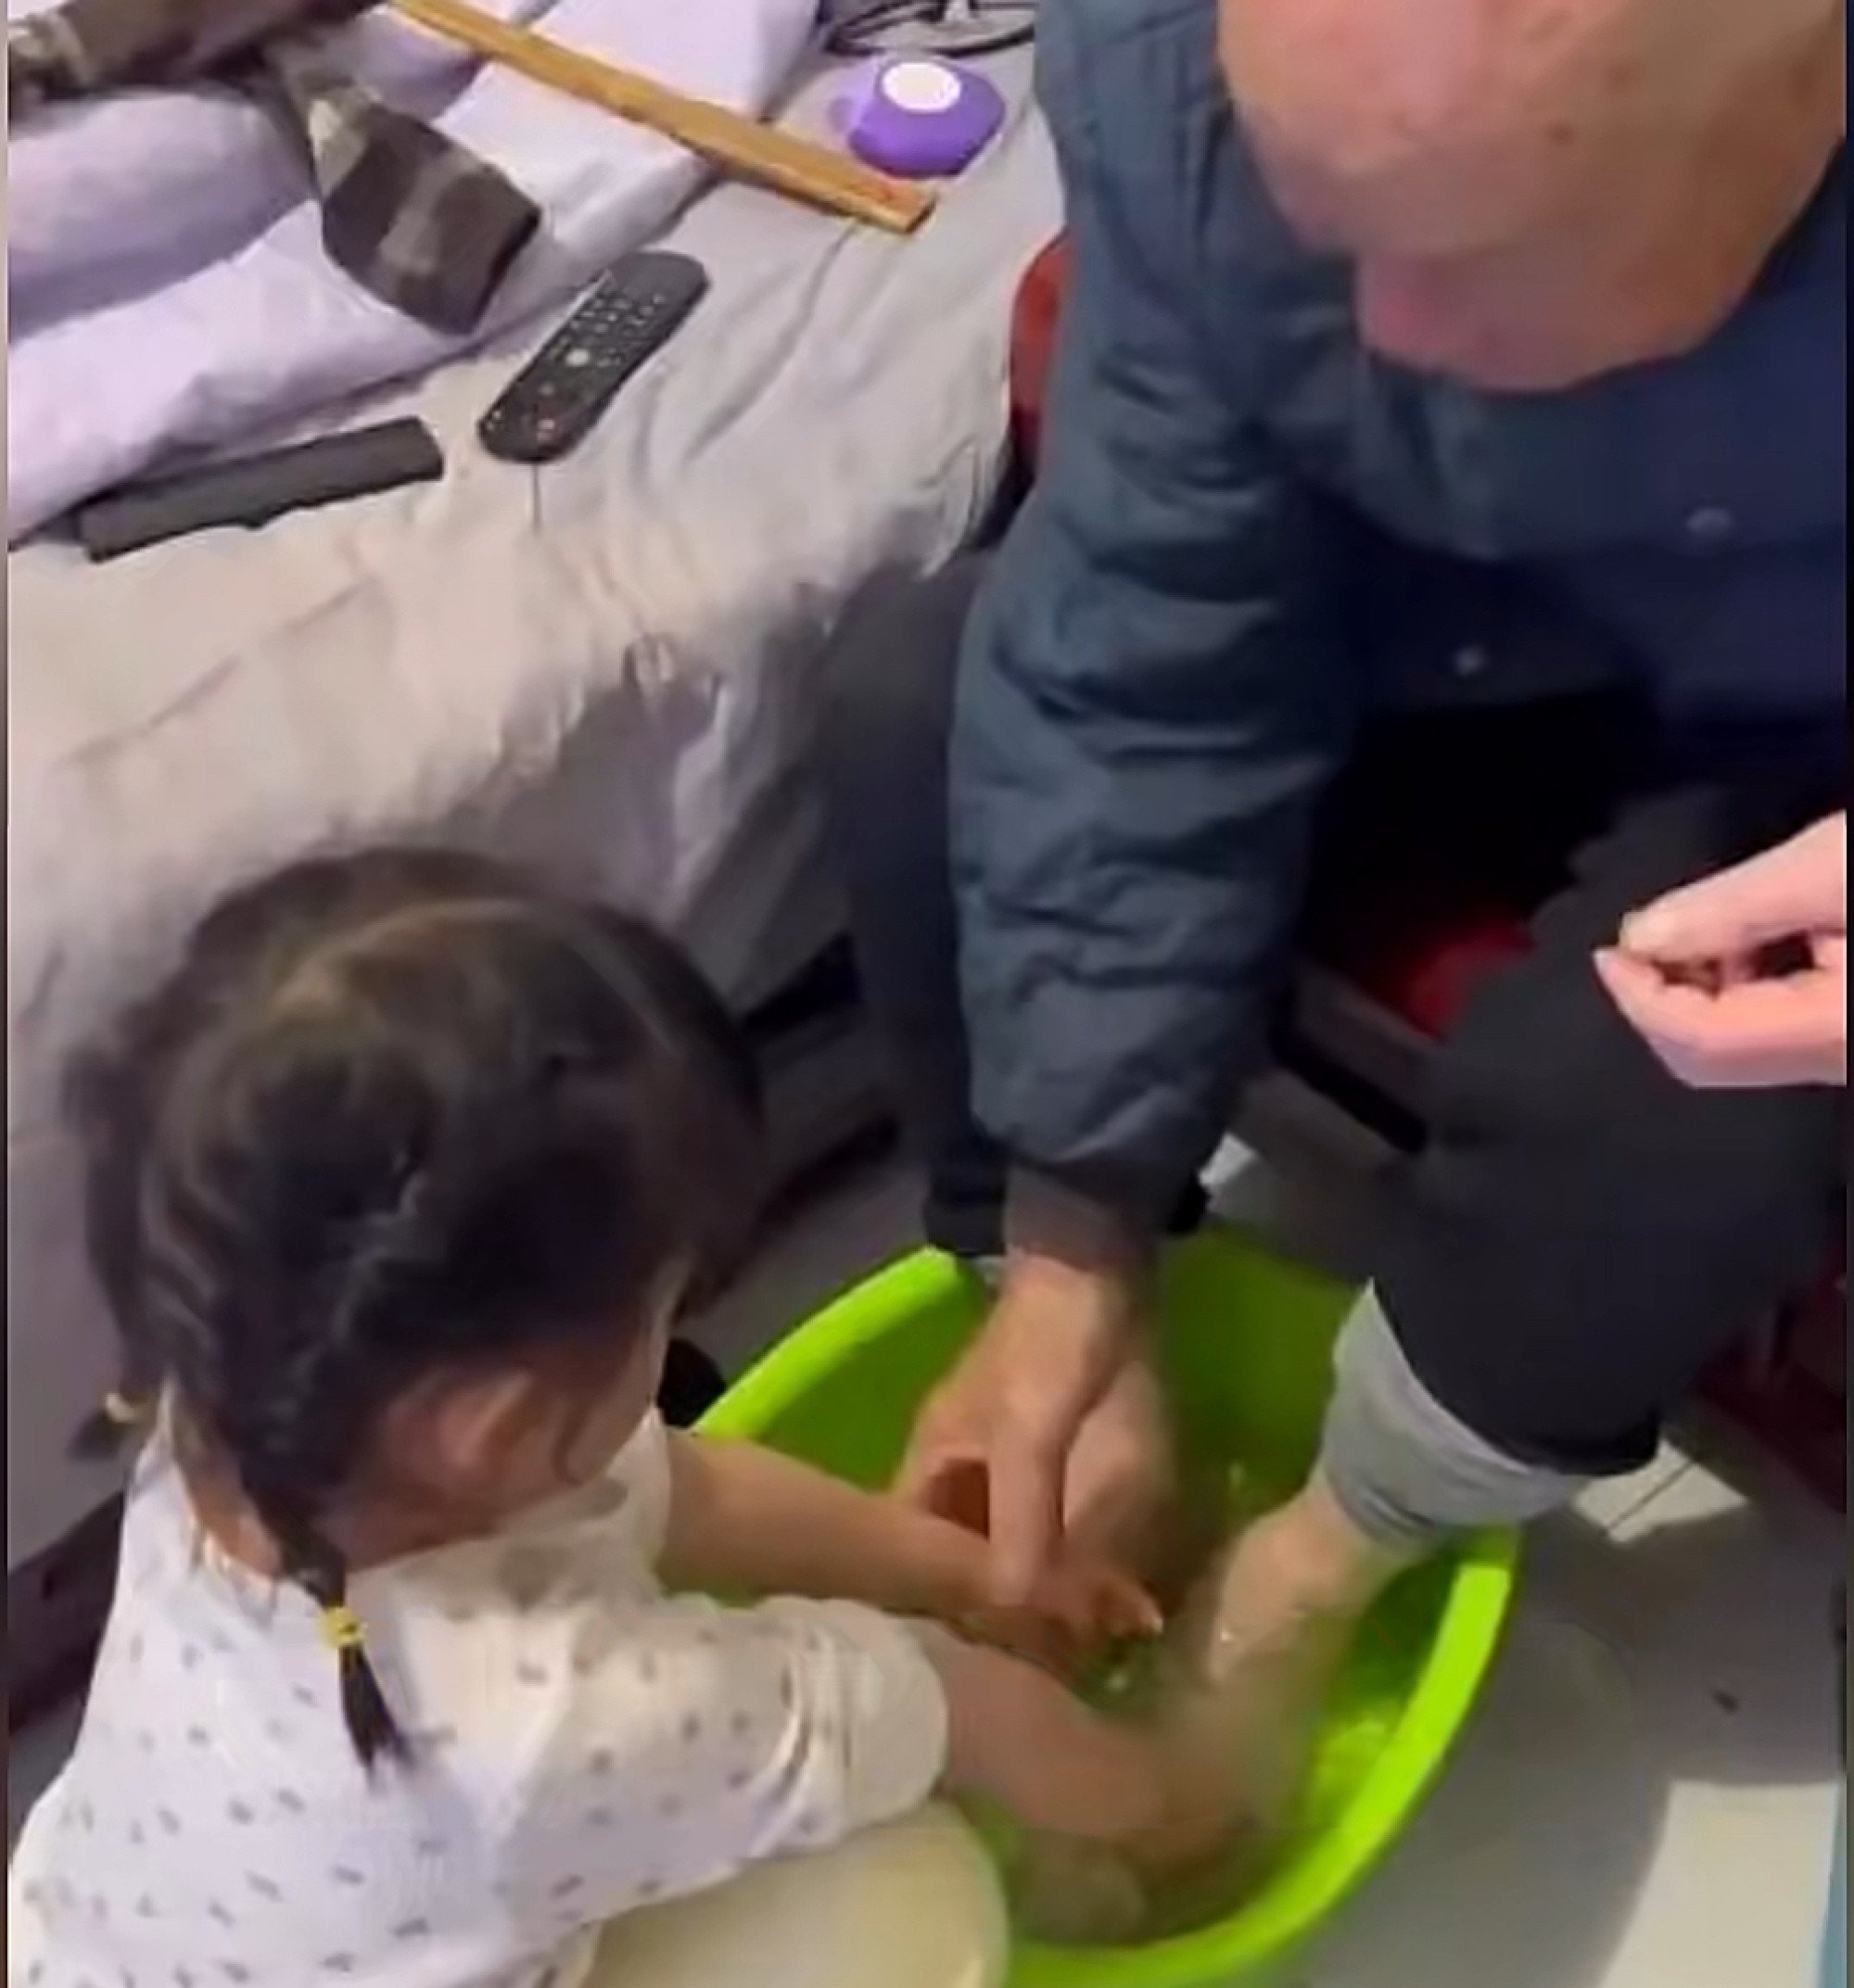 The care Liu gave to Ruan even stretched to his granddaughter helping the old man wash his feet. Photo: Baidu